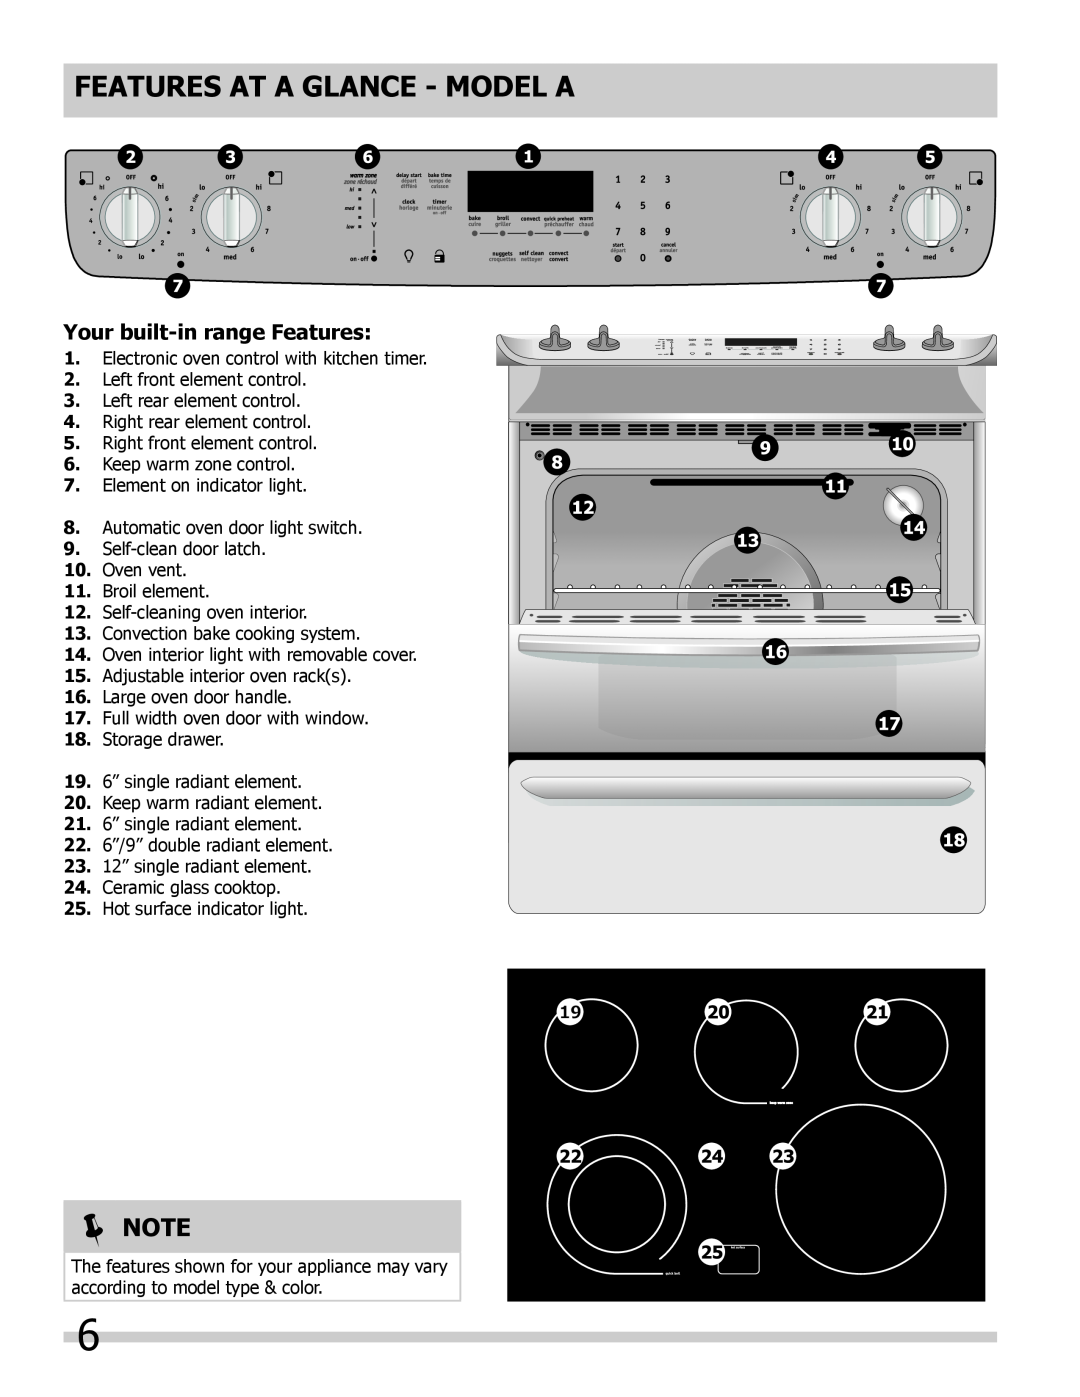 Frigidaire 318205804 manual FEATURES AT A GLANCE - mODEL A, Note, Your built-in range Features 